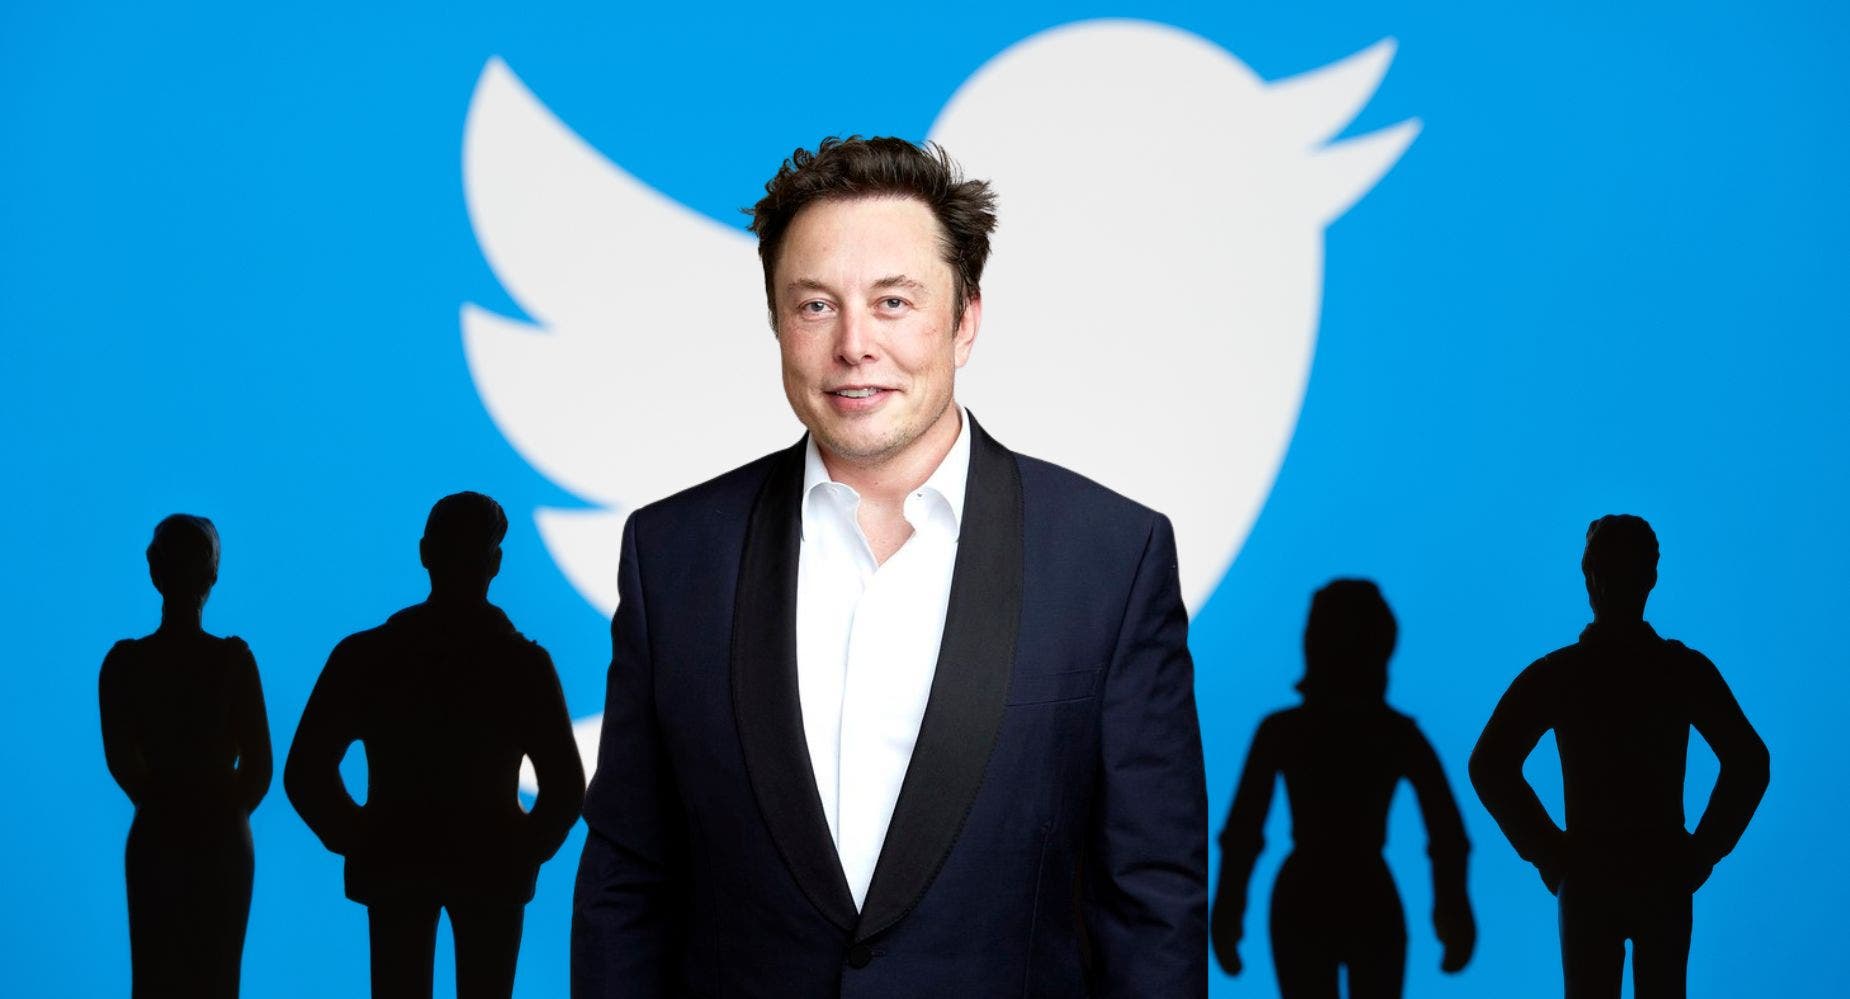 Who Could Be The Next Twitter CEO After Elon Musk? A Look At 7 Potential Candidates